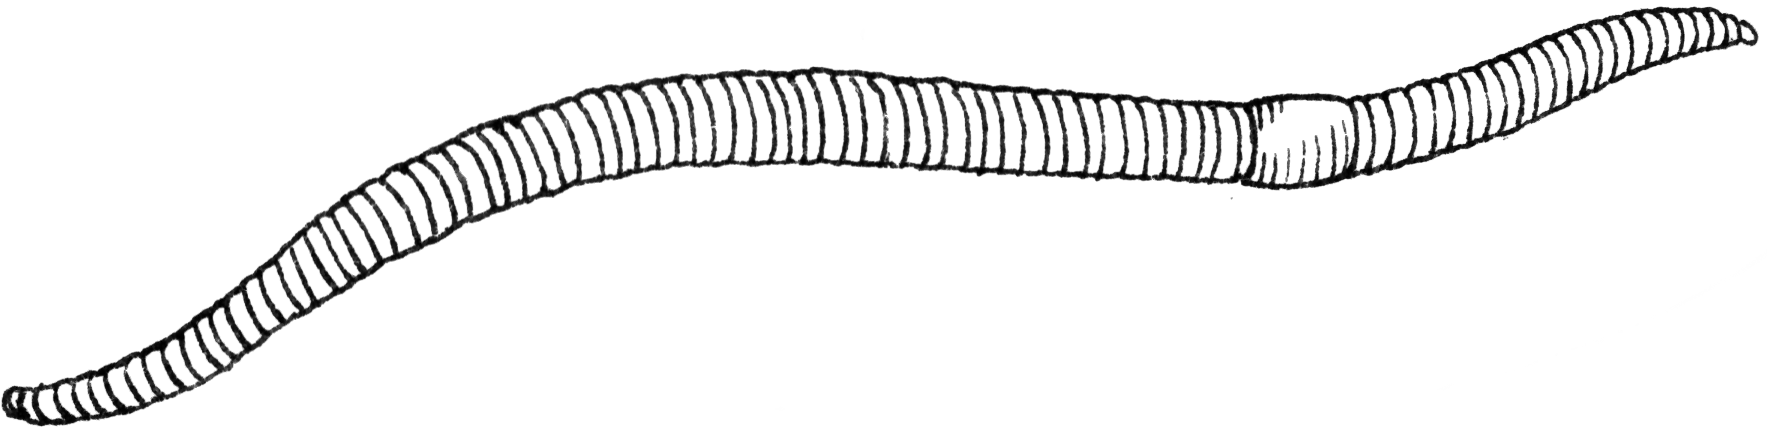 Free earthworm cliparts download. Worm clipart annelida